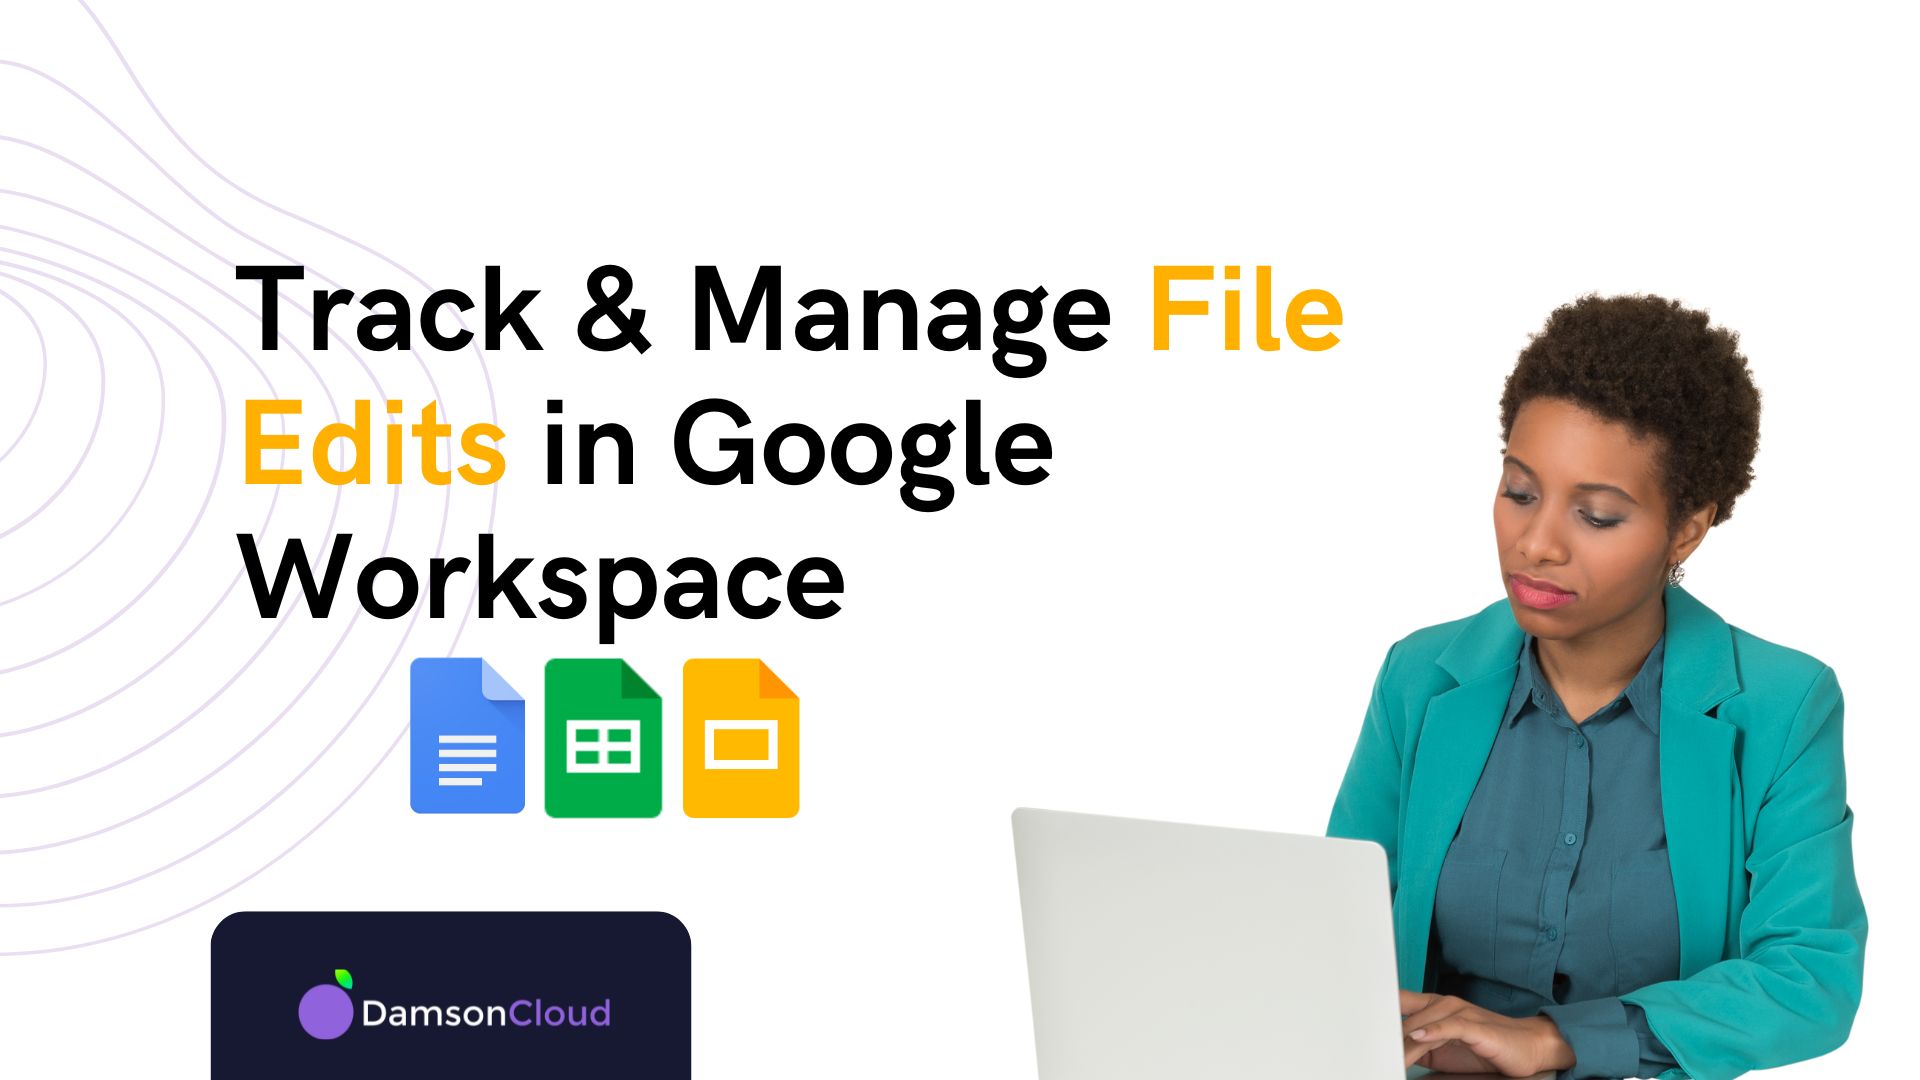 How to track and manage edits in Google Workspace documents